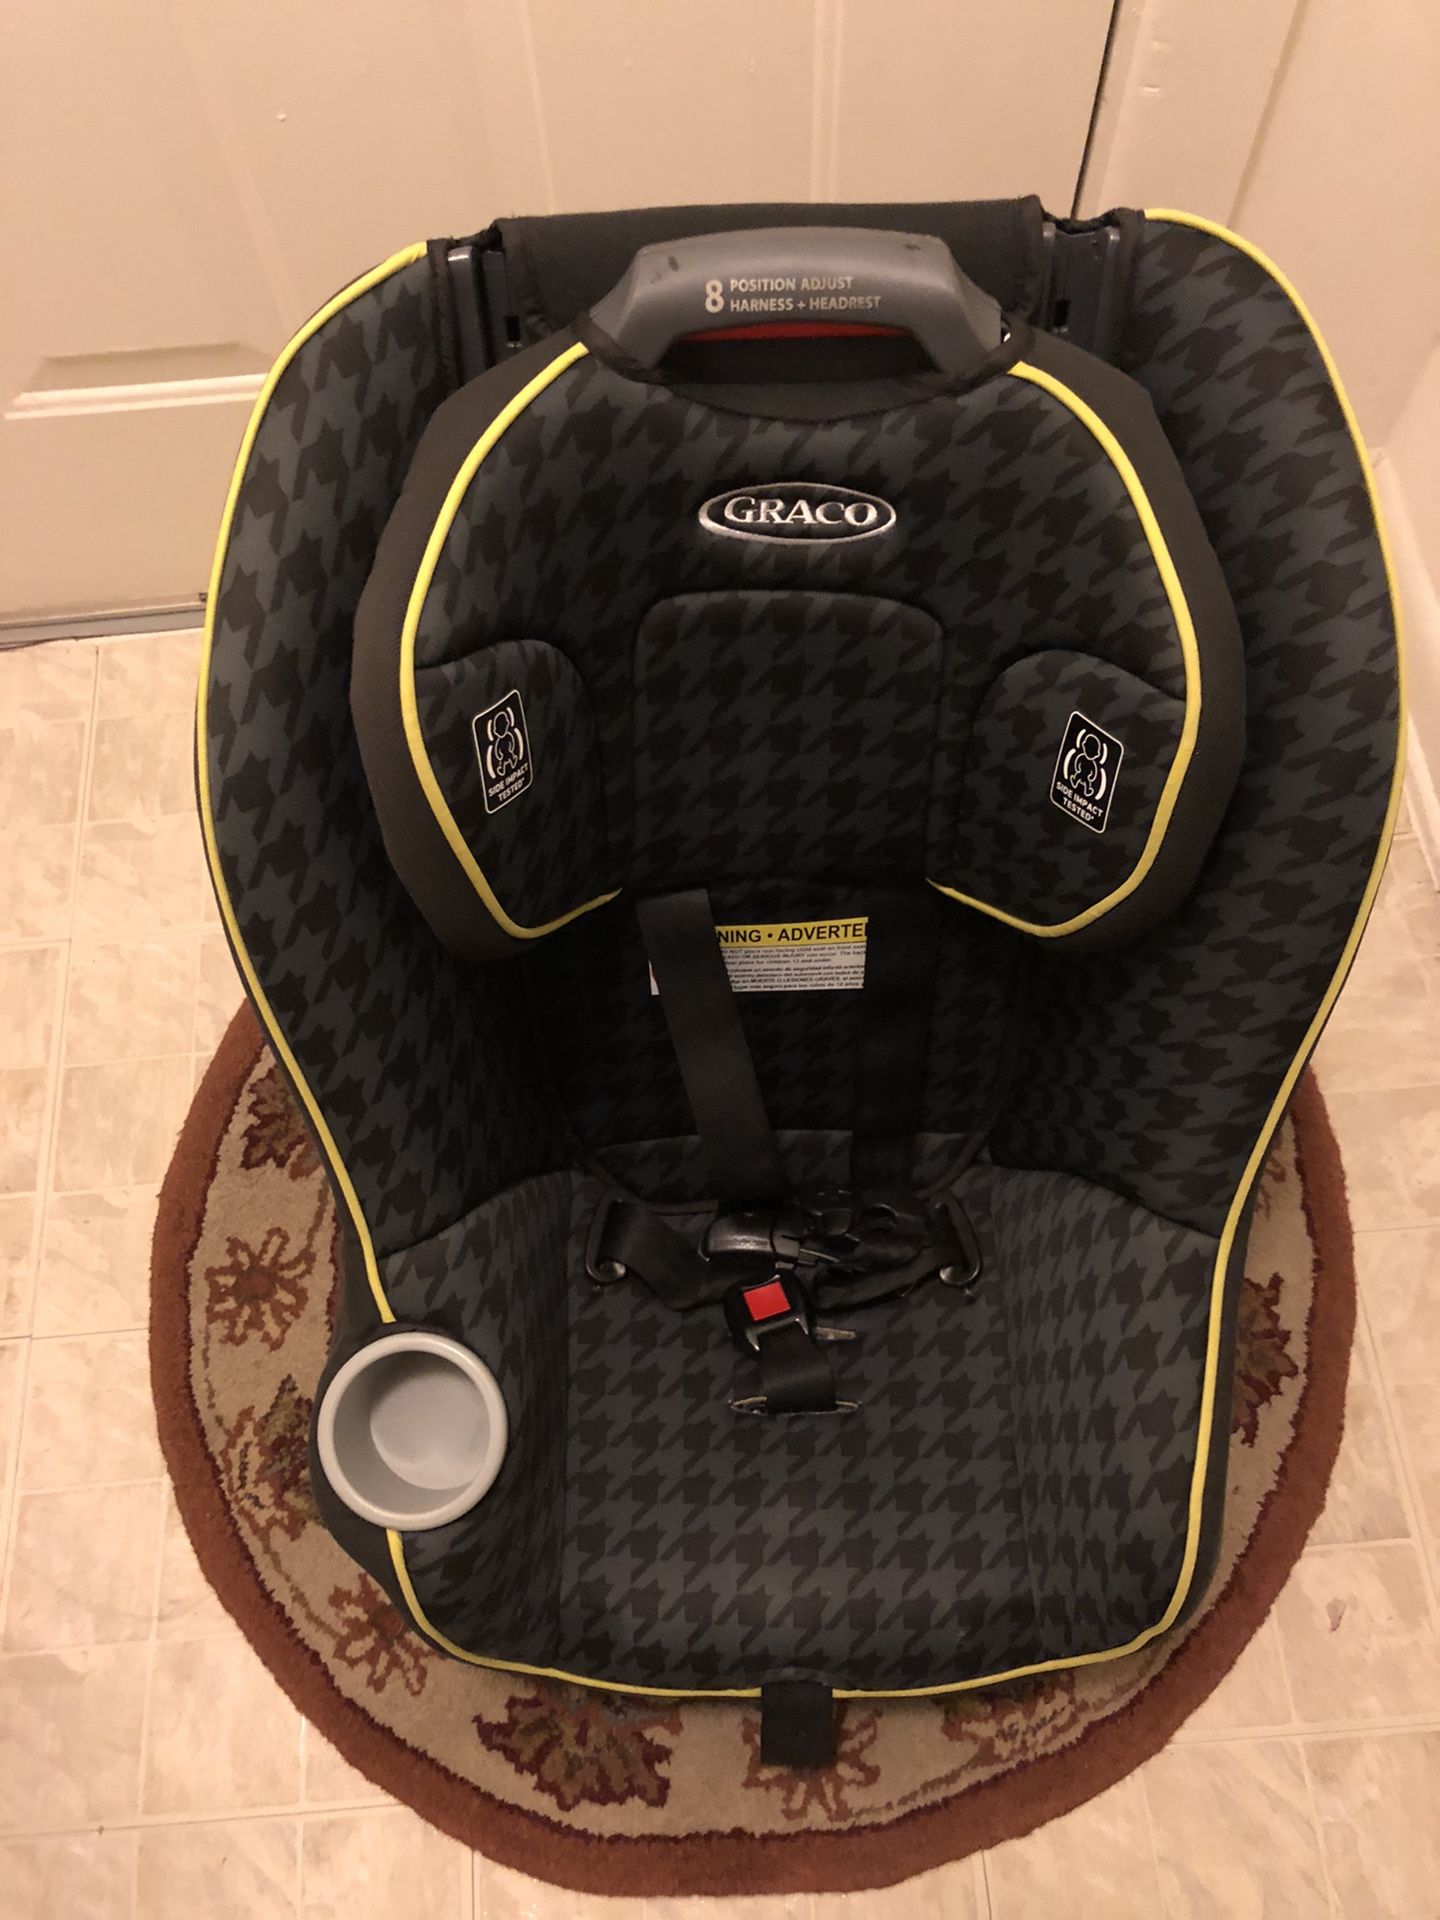 New Graco Car seat Booster Seat Excellent Condition